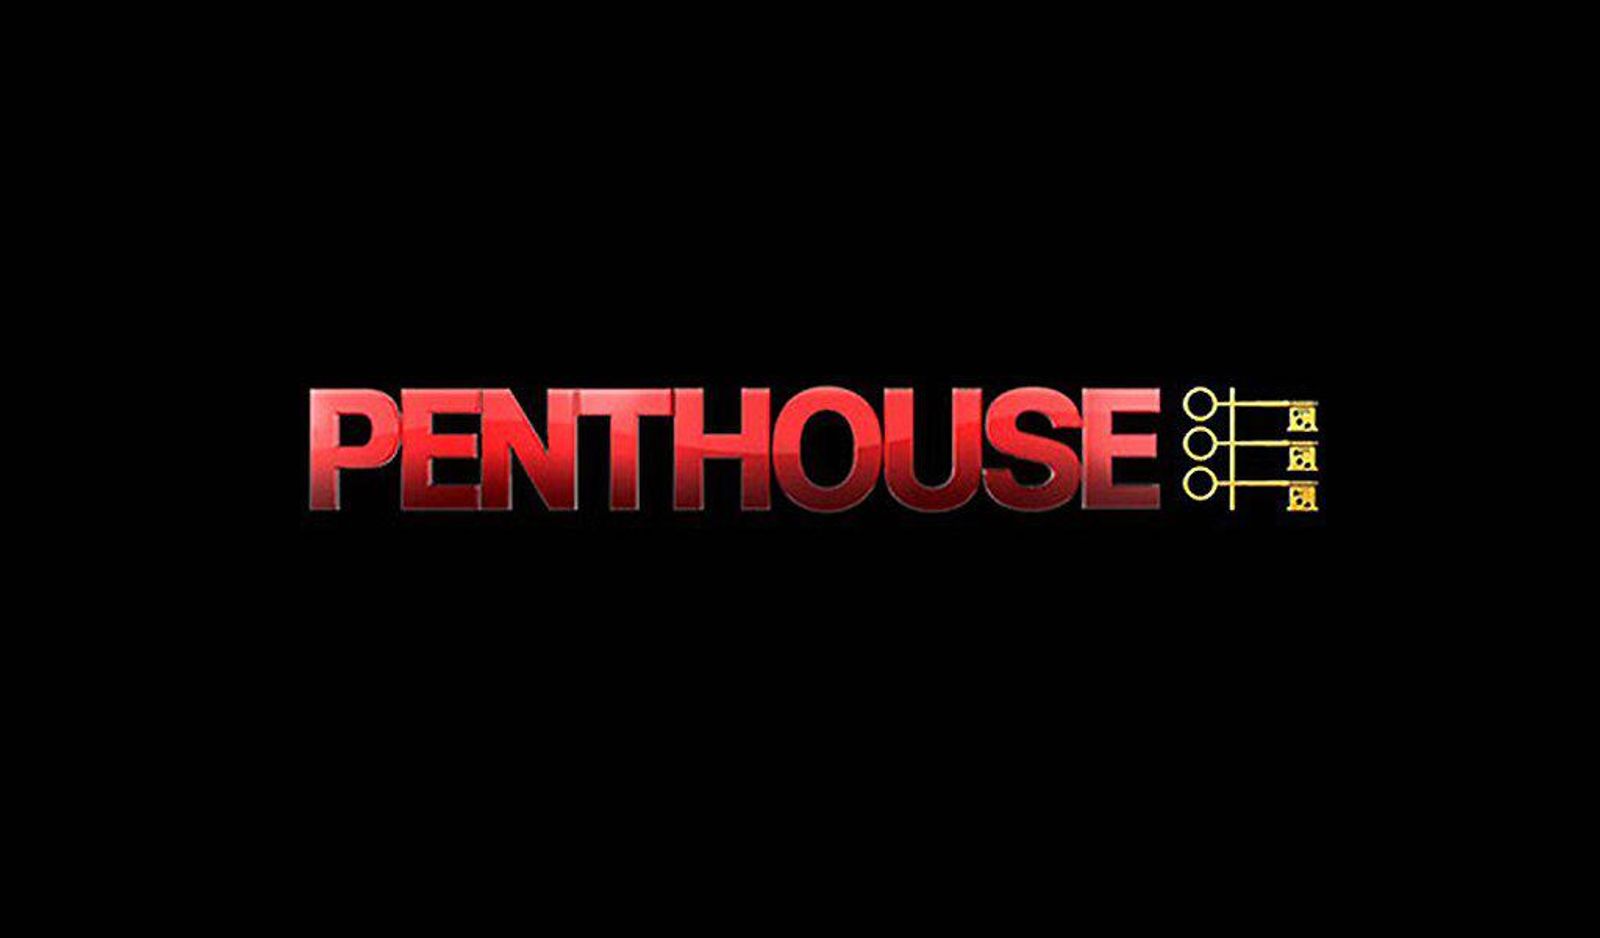 Penthouse Launches 'Stranger Things' Contest